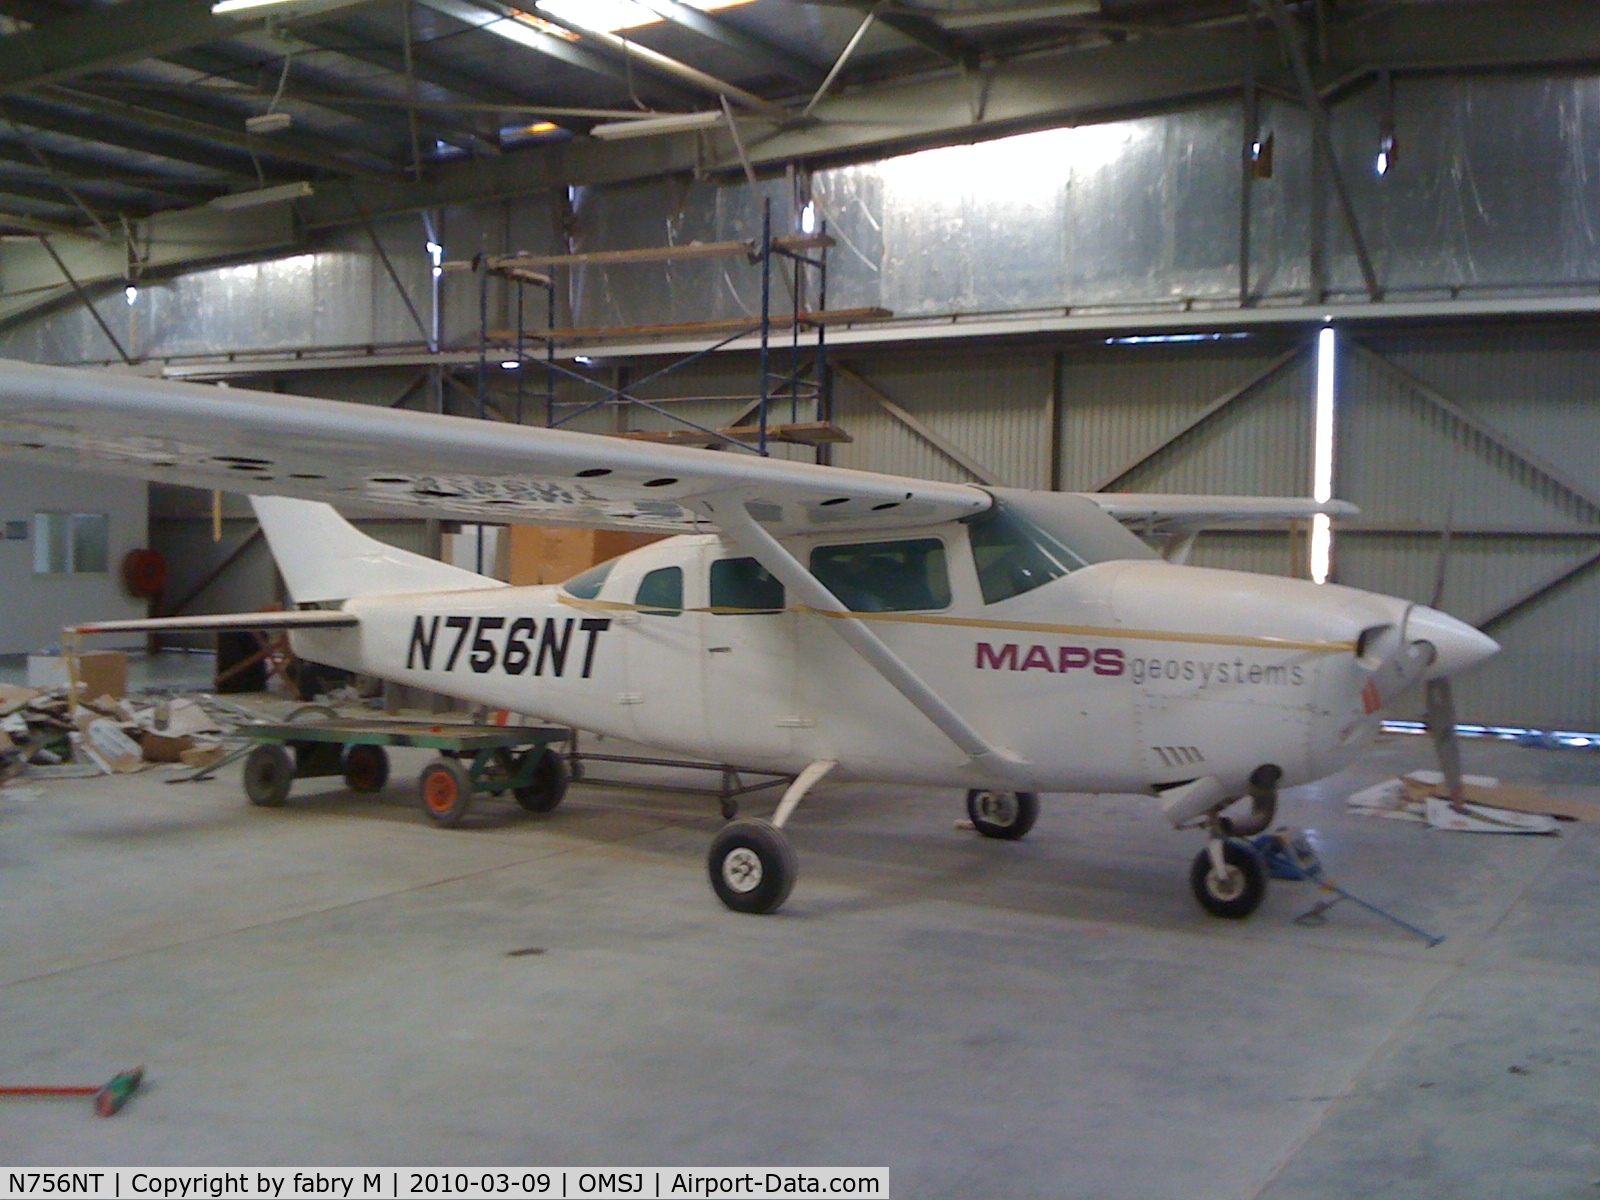 N756NT, 1977 Cessna TU206G Turbo Stationair C/N U20604230, Very low time Cessna 206 used for aerial survey in the middle east owned by Fugro-Maps in Sharjah, UAE. She is stored in SHJ and believed to be still for sale.